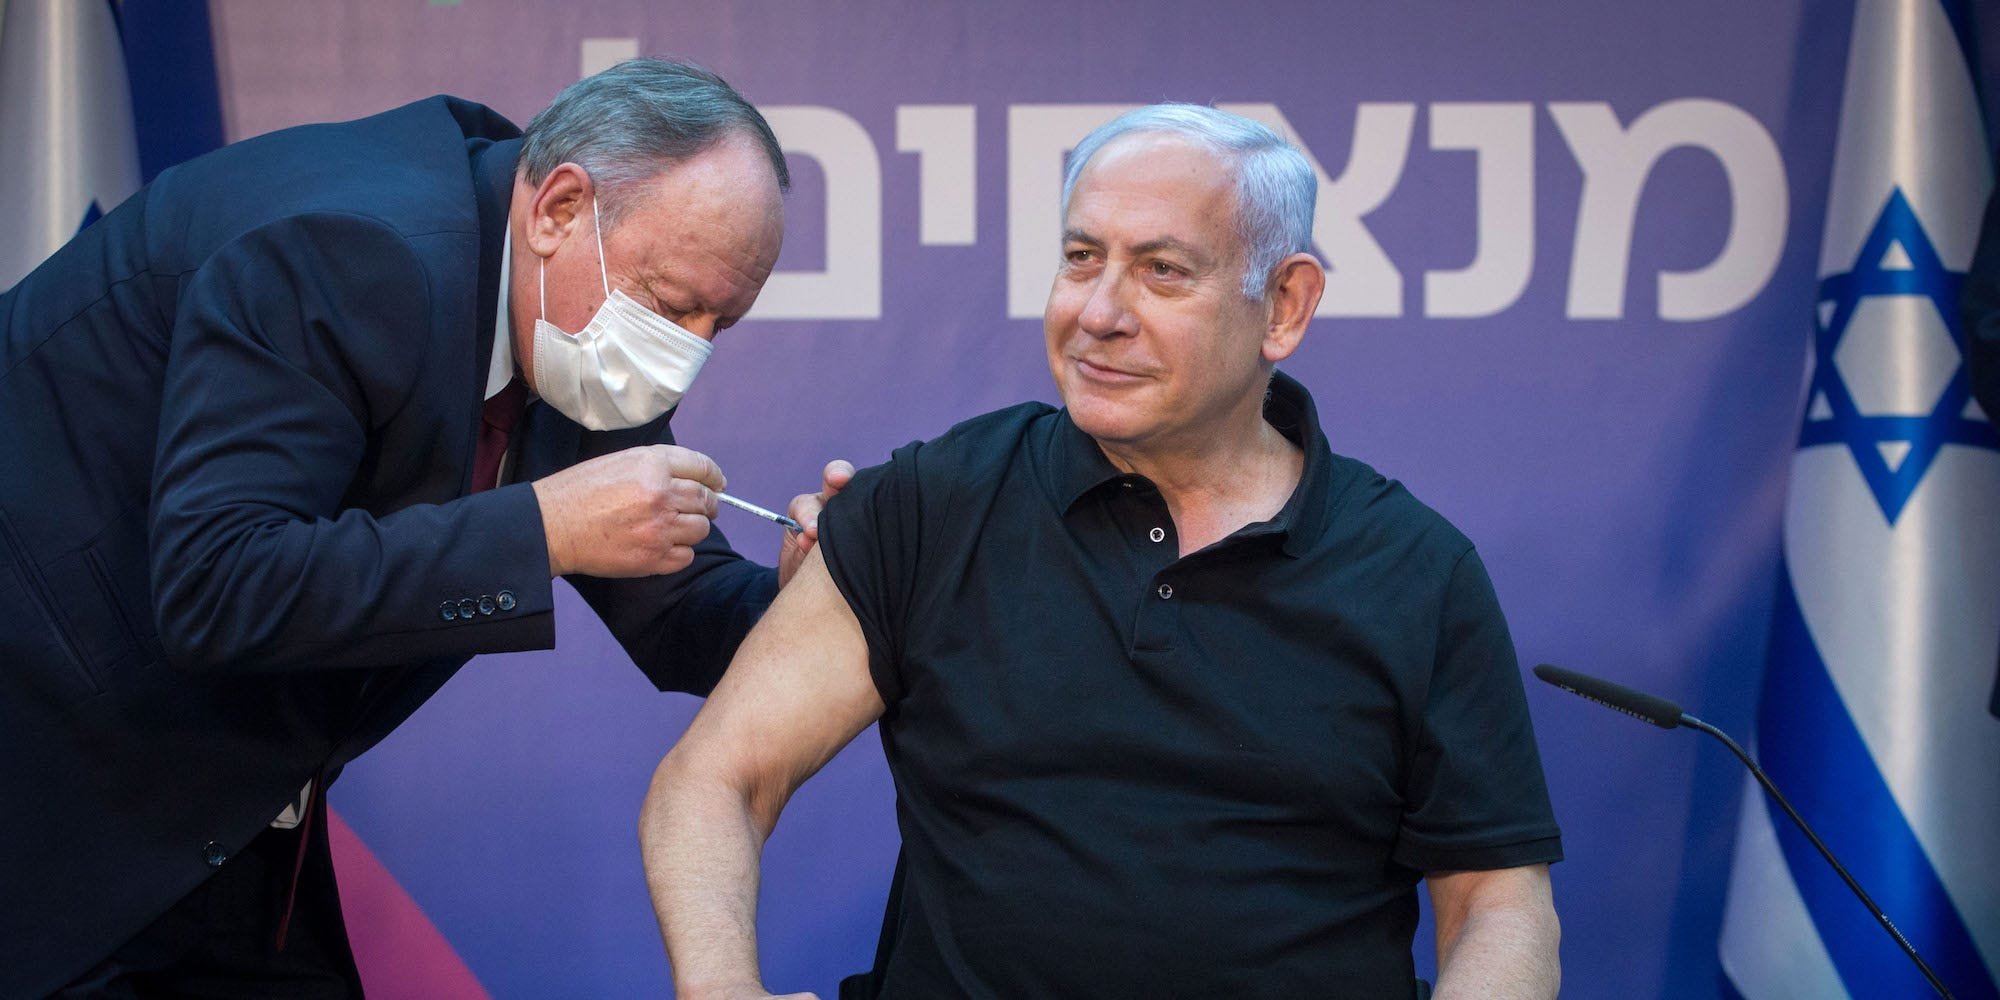 Israel is warning that a single dose of the Pfizer vaccine is 'less effective than we hoped' against COVID-19, and it could be a blow to the US and UK strategies